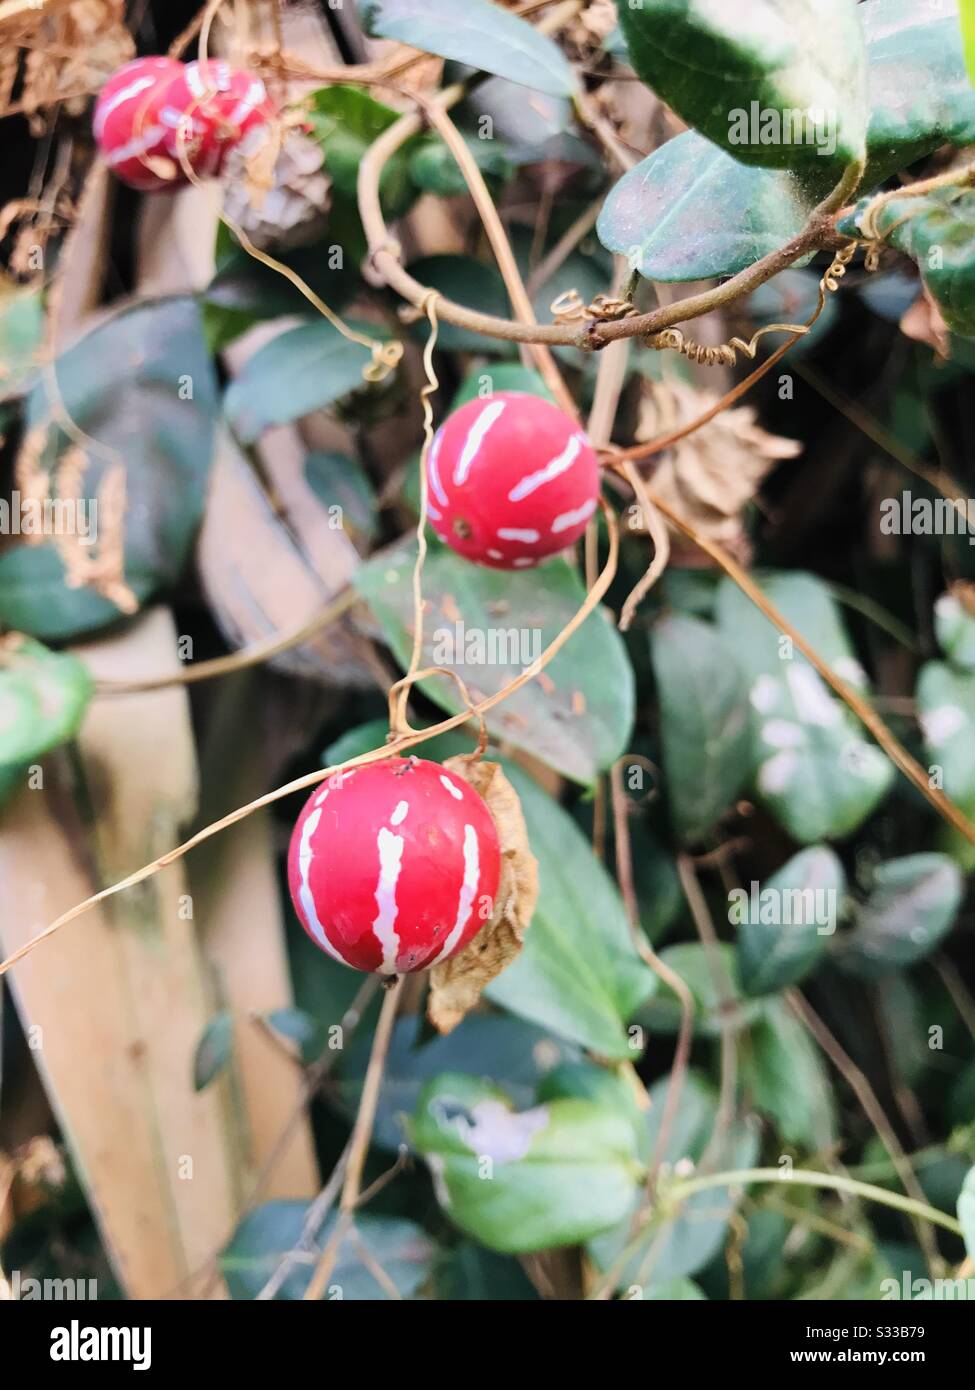 Shivlingi Beej or Shivlingi Seeds found near shrubs in hometown- used for the treatment of female infertility- ornamental medicinal plant - red & white colour seeds- zoomed & accidentally in Live mode Stock Photo